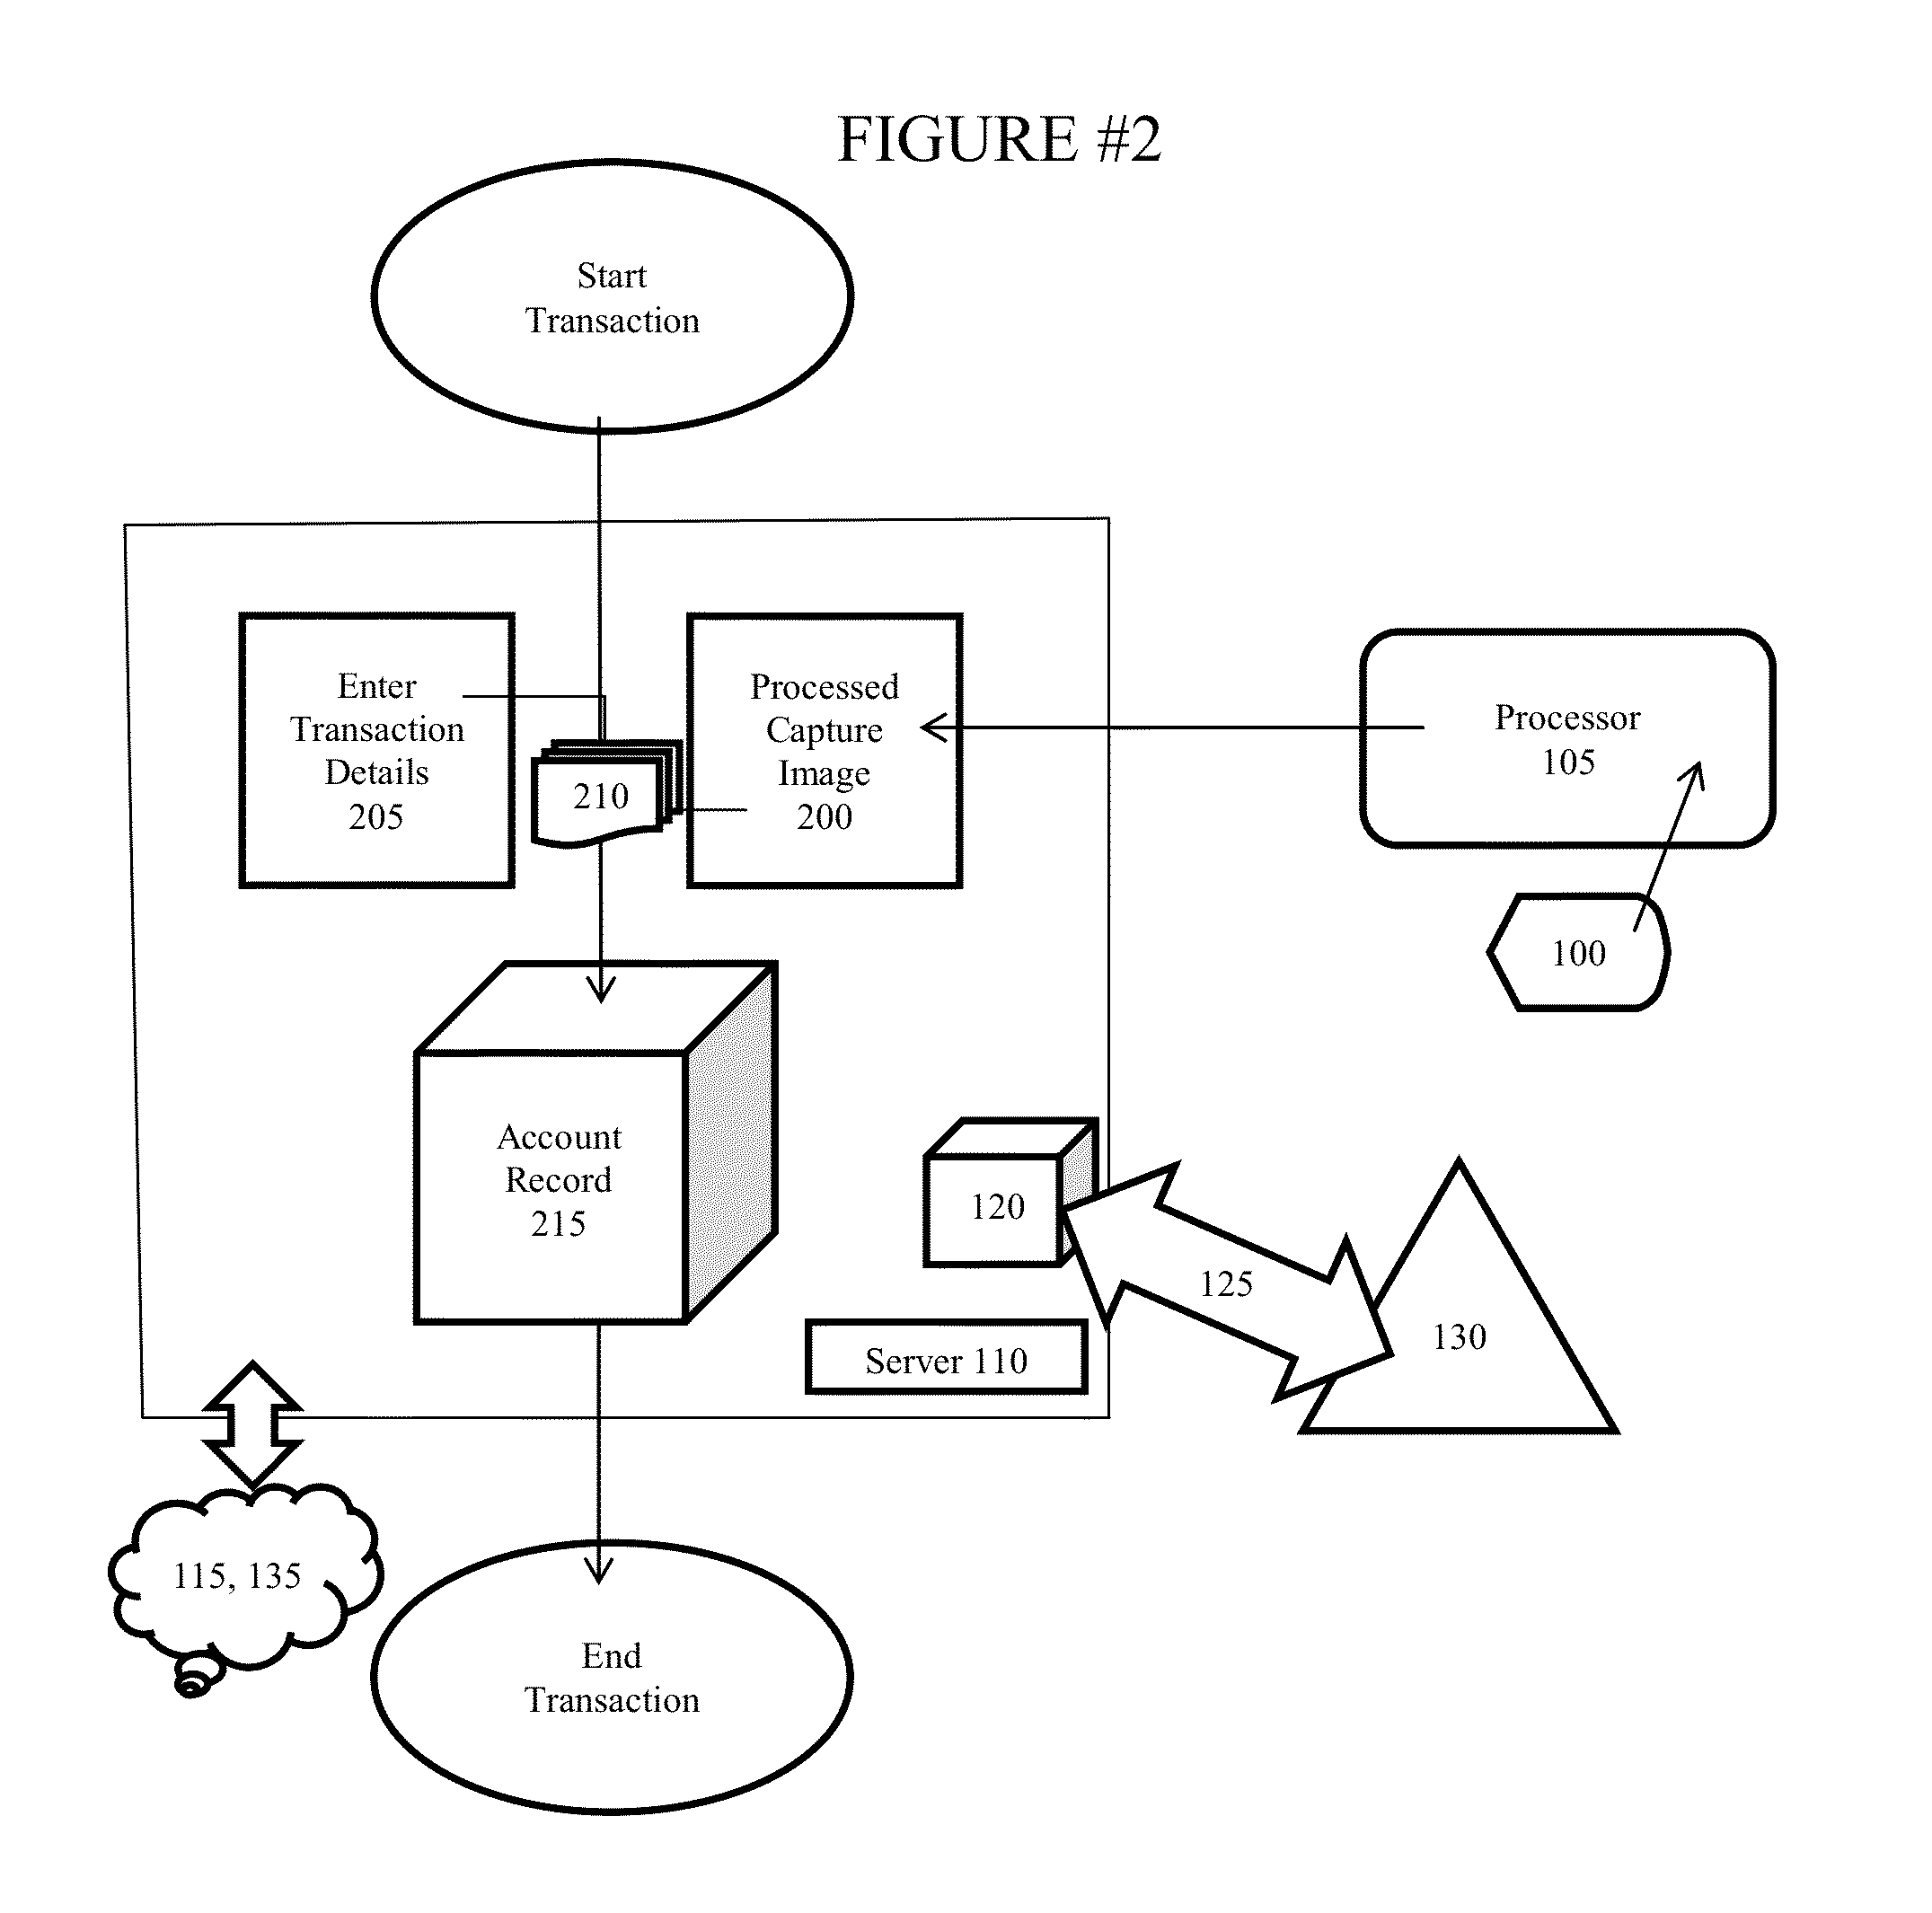 Method for Implementing and Integrating Biometric Markers, Identification, Real-Time Transaction Monitoring with Fraud Detection and Anti-Money Laundering Predictive Modeling Systems